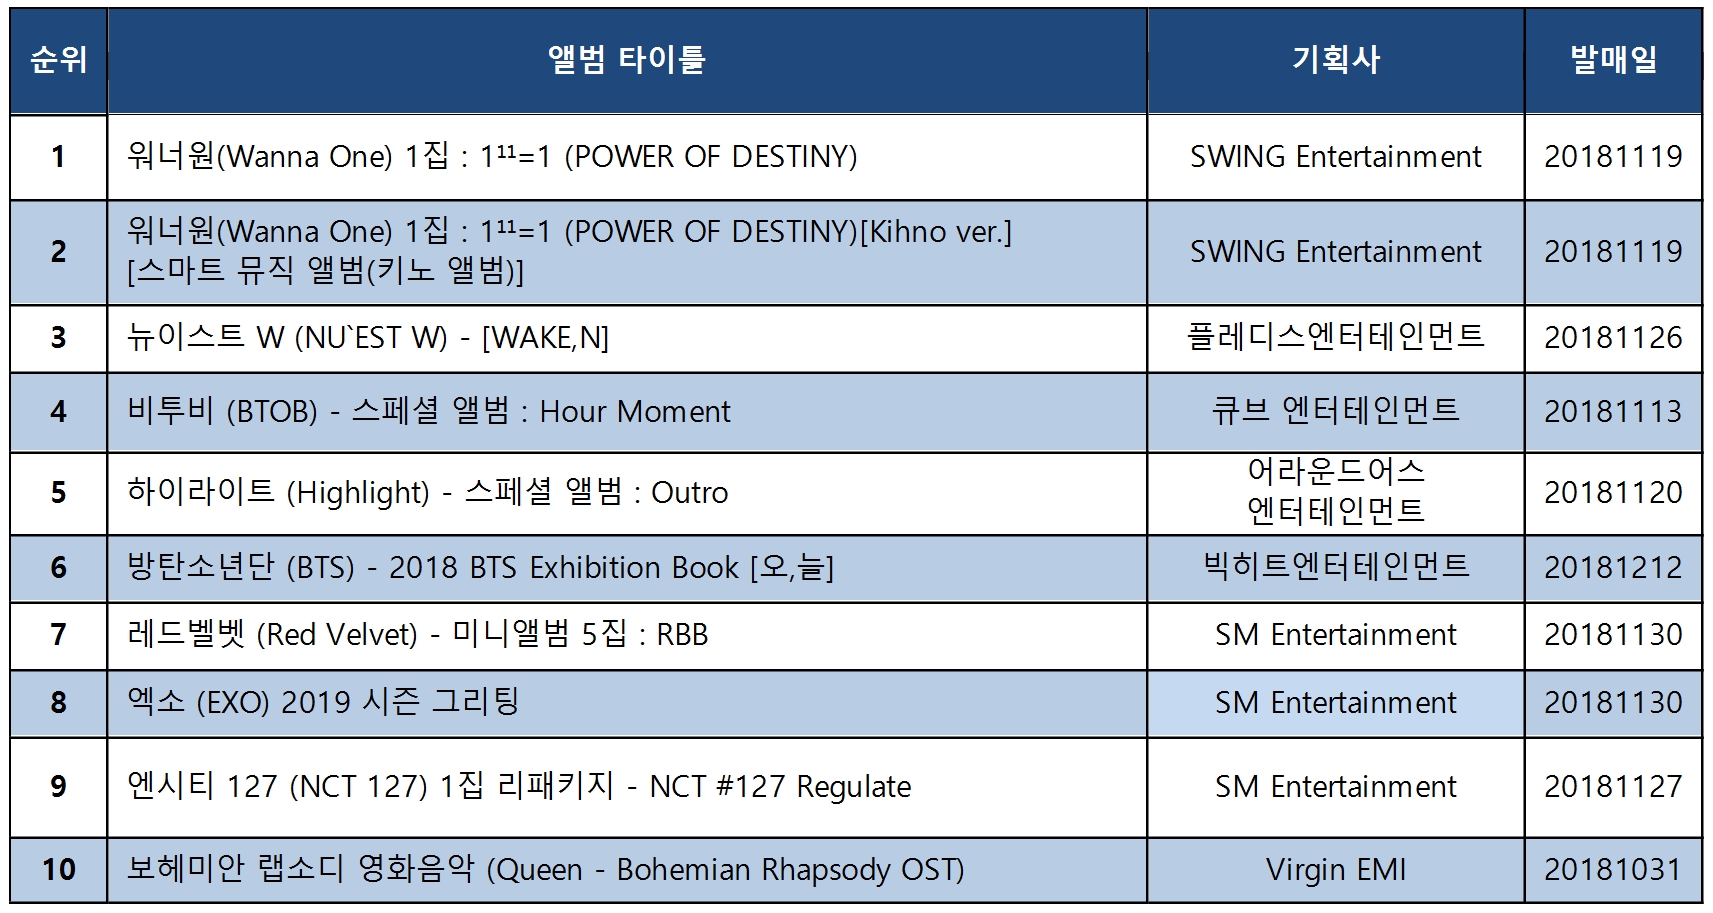 Project group Wanna One won both the music chart and the album sales chart.According to the 20th Yes 24 record sales ranking, Wanna Ones first full-length album [111=1 (POWER OF DESTINY)] was the first place for three consecutive weeks in the album sales ranking.took the place.Following this, New East Ws new album [WAKE,N] started booking sales with CDs and kino albums, reaching number 3 this week, and BiToBis special album is also steadily gaining popularity.In addition, EnCity 127s regular 1st album repackage album [NCT #127 Regulate] came in ninth with the start of the booking, and the original soundtrack album of the movie Bohemian Rhapsody, which tells the story of the British rock band Queen, came in 10th.Meanwhile, Wanna Ones title song Spring breeze of [111=1 (POWER OF DESTINY)] is the first place on various online music charts such as Melon, Genie, Naver Music, and Soribada.Im on.As a result, Wanna One released five title songs from debut to last activity, Energic, Beautiful, Boomerang, Hold Up, and Spring Breezeand the record of the first time.